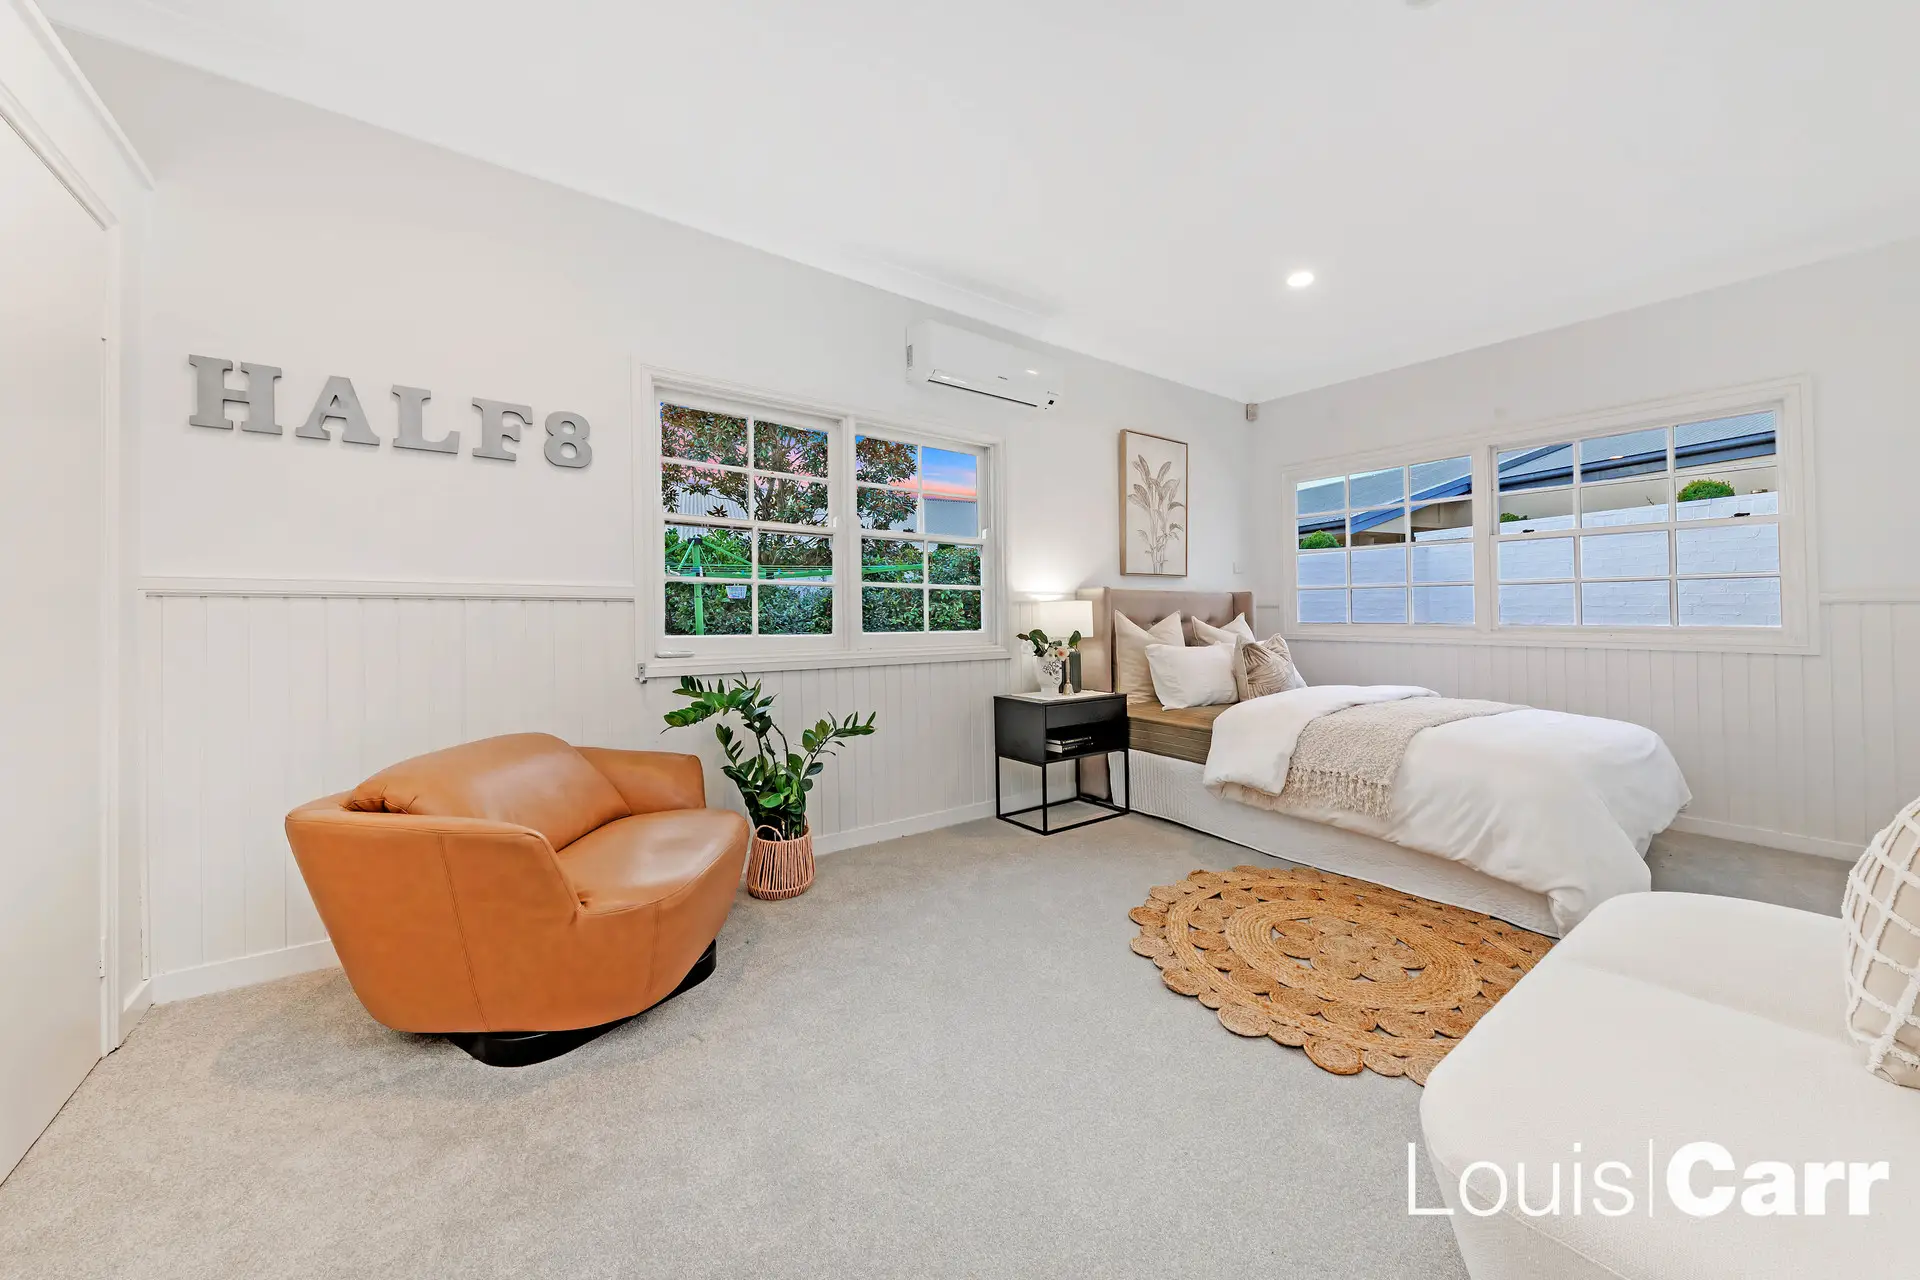 Photo #8: 9 Araluen Place, Glenhaven - Sold by Louis Carr Real Estate